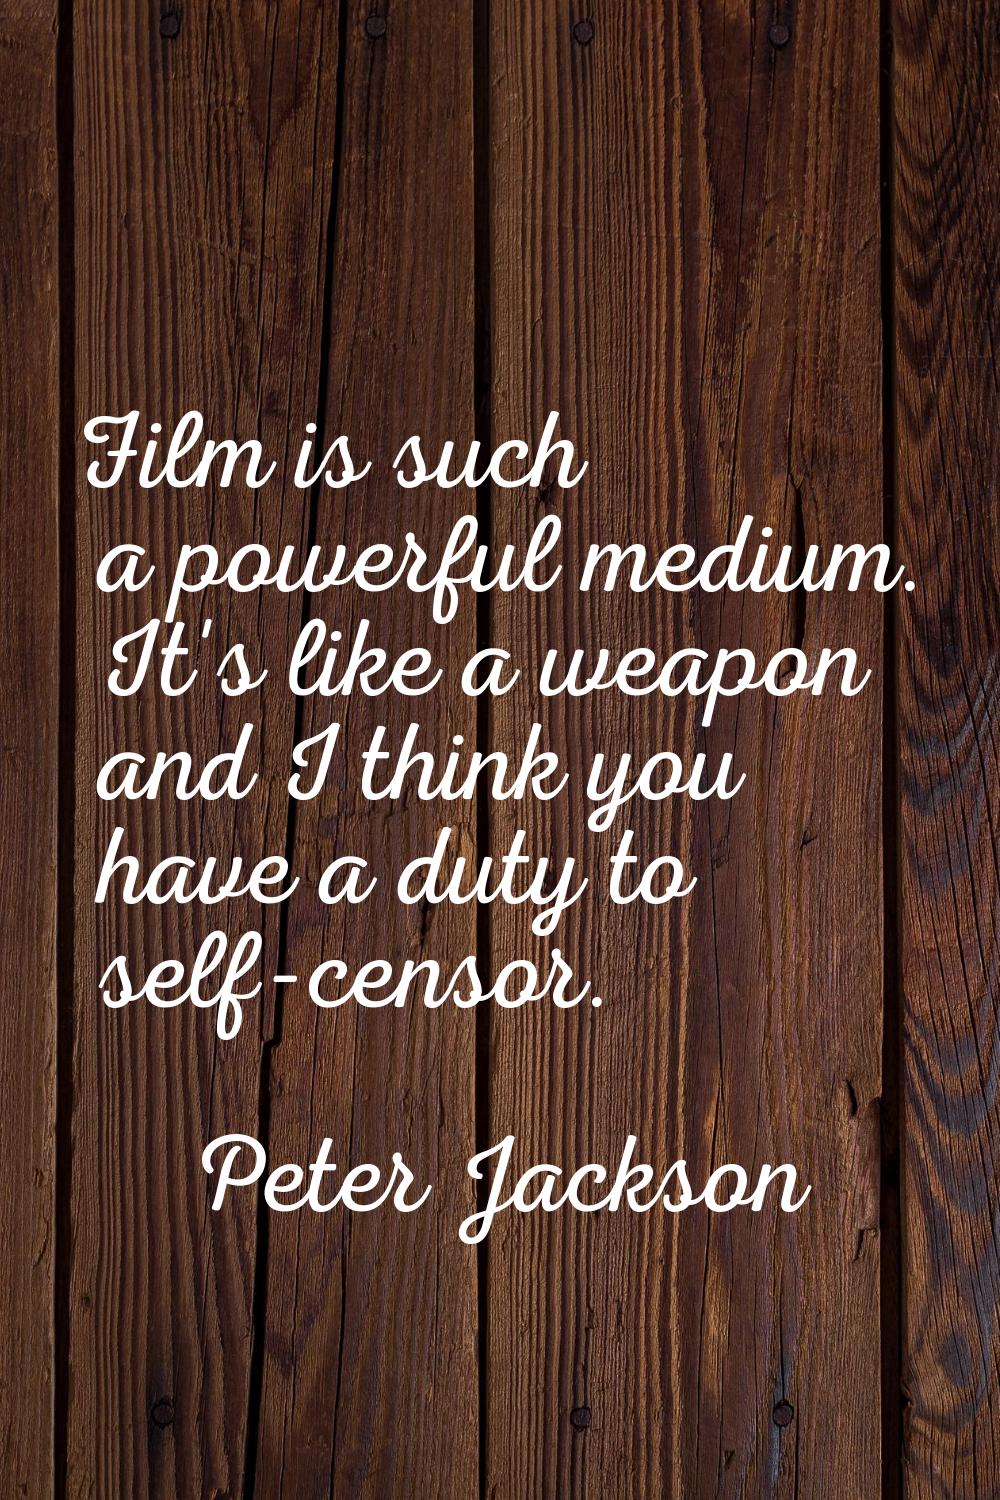 Film is such a powerful medium. It's like a weapon and I think you have a duty to self-censor.